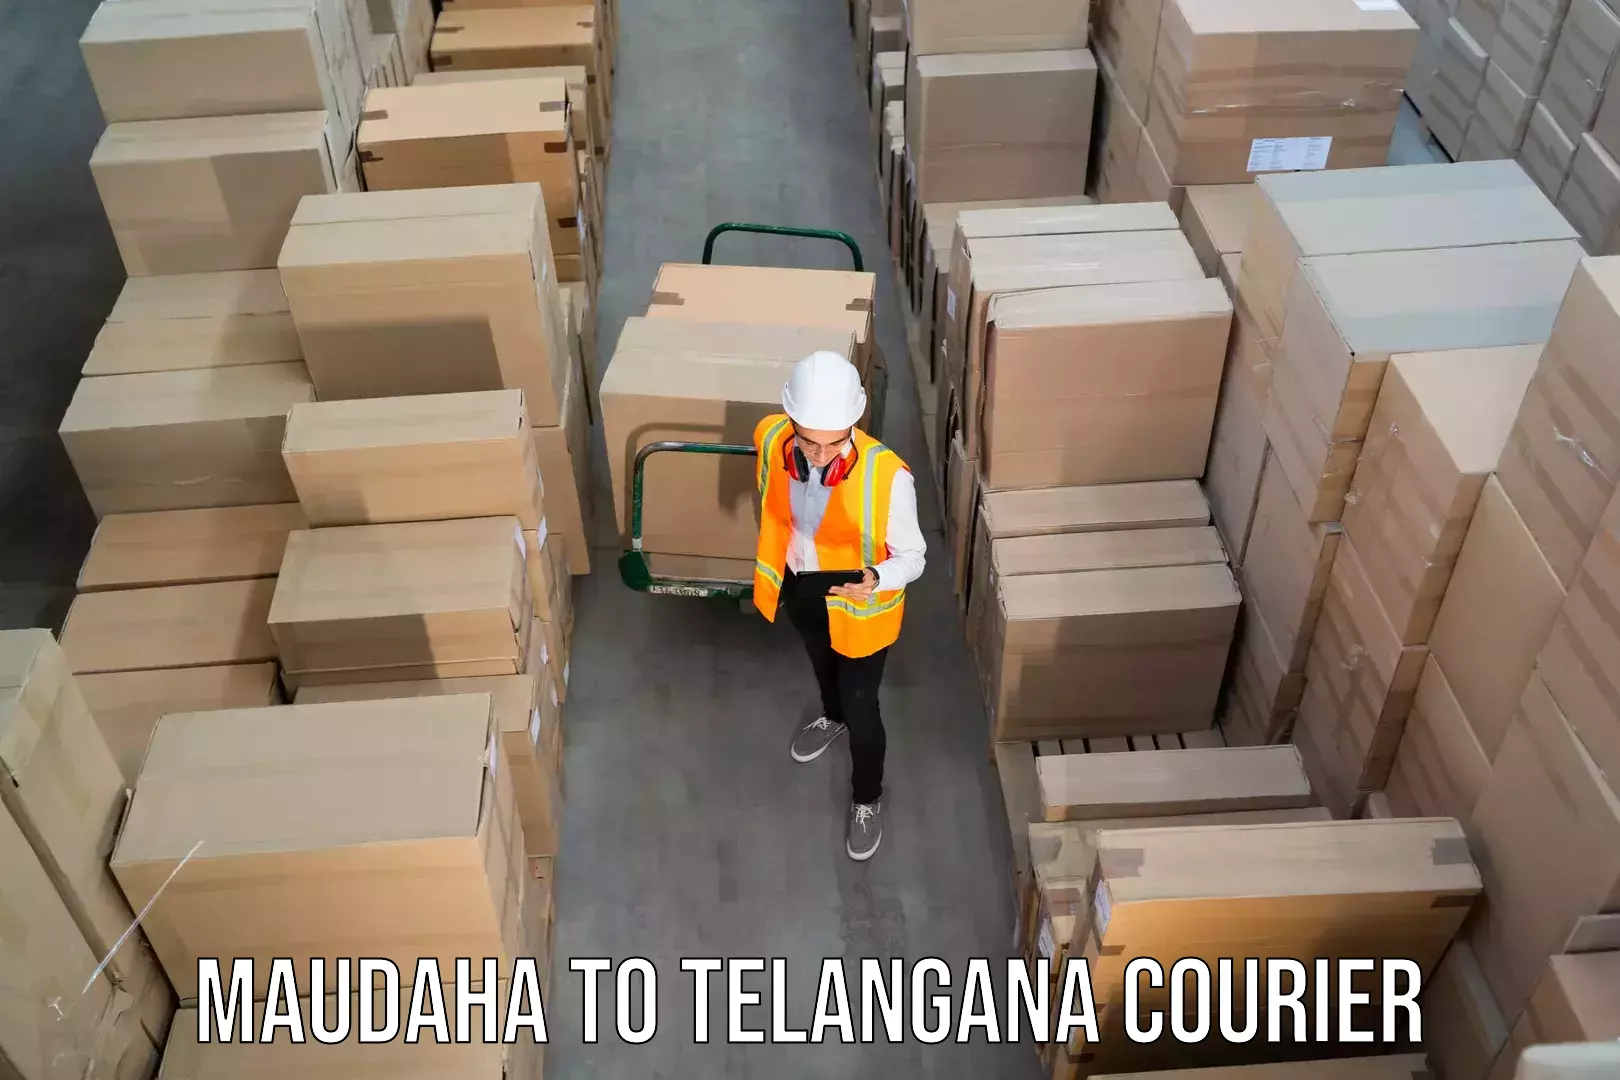 State-of-the-art courier technology Maudaha to Telangana